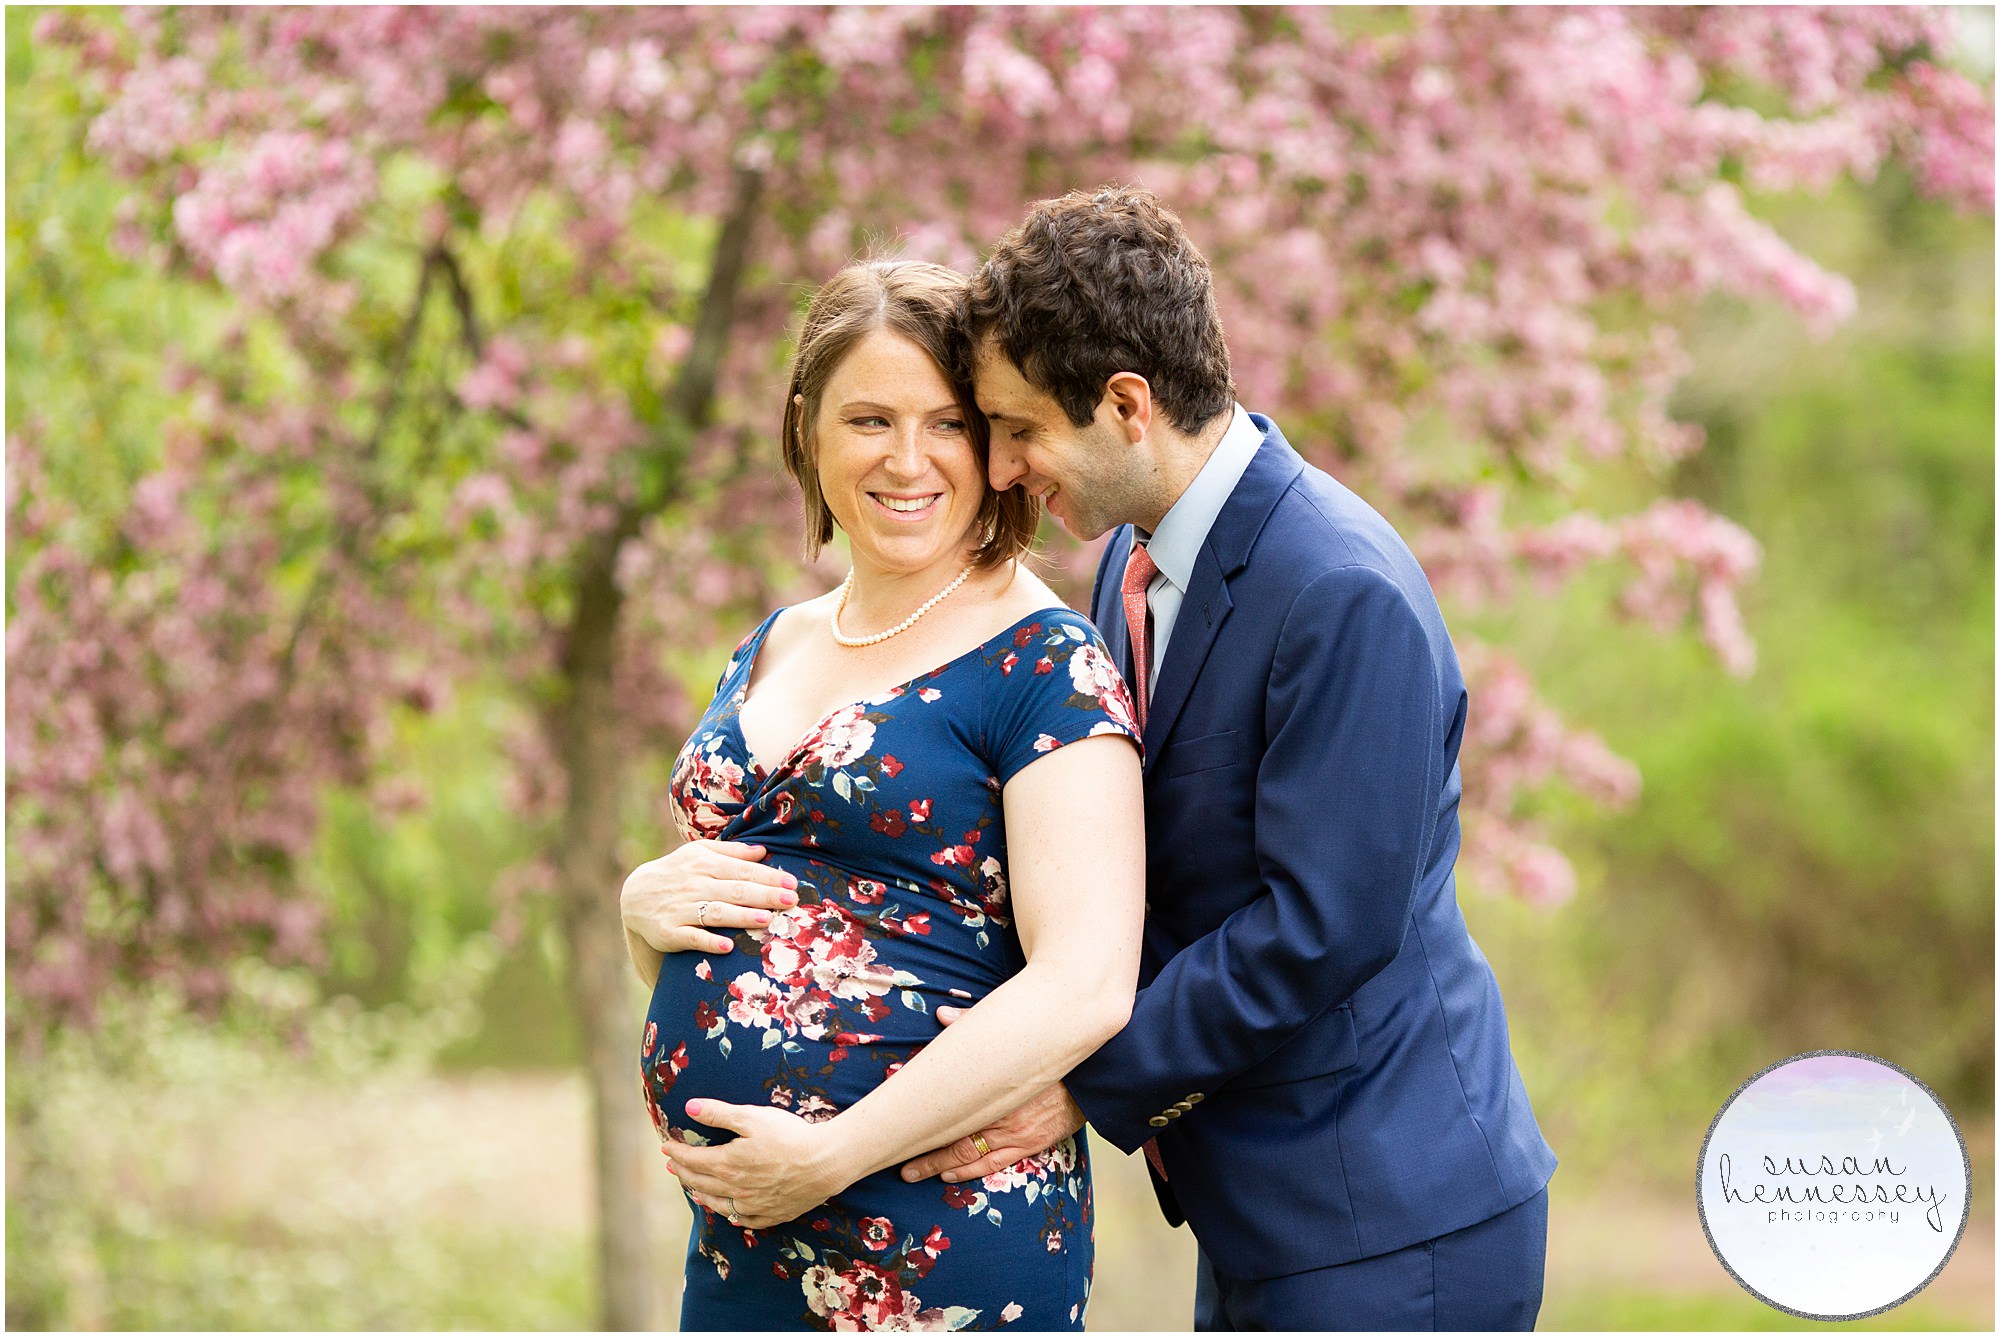 A spring cherry blossom maternity session in NJ